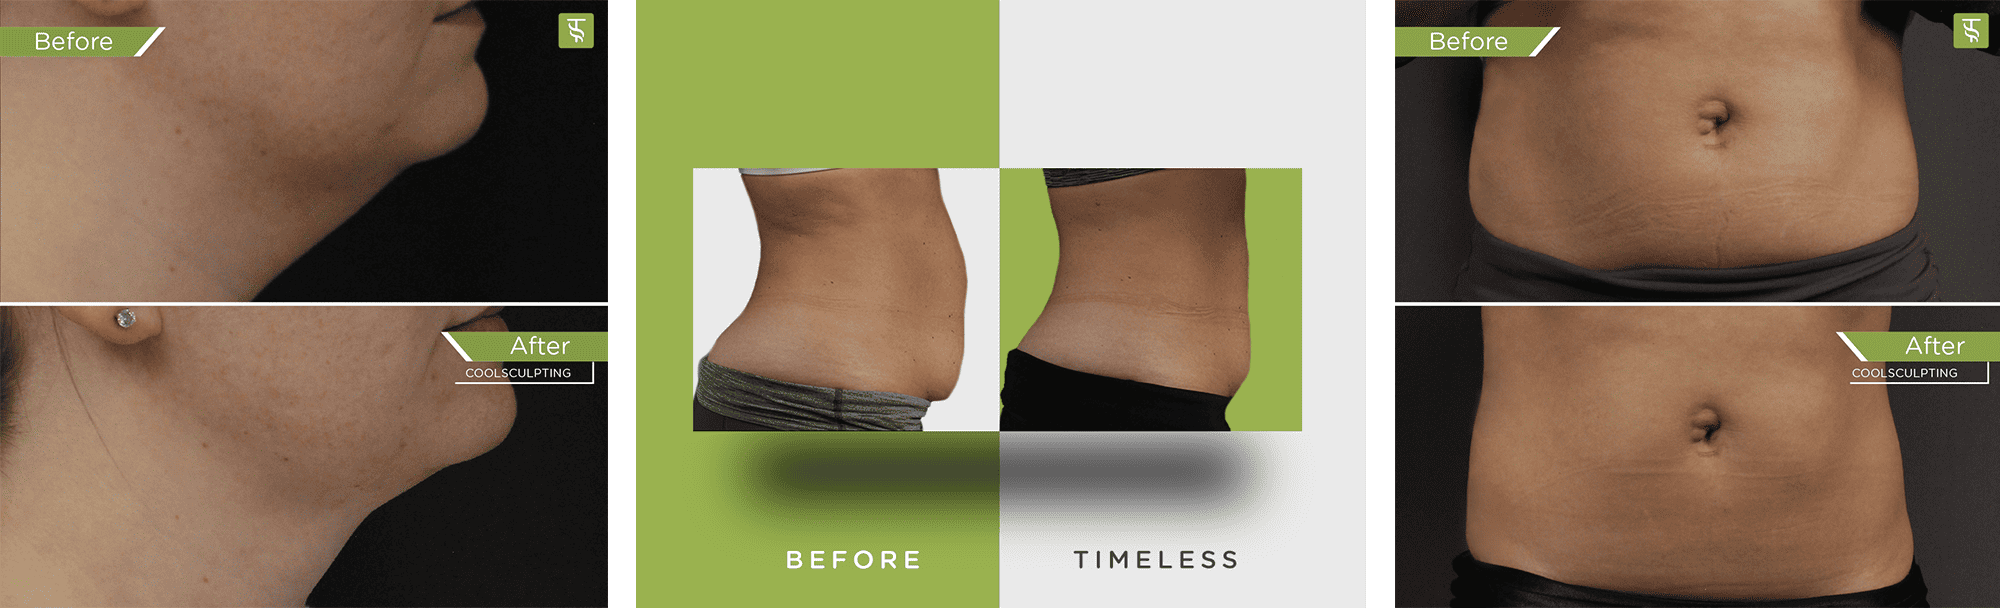 Before and After photos of coolsculpting 